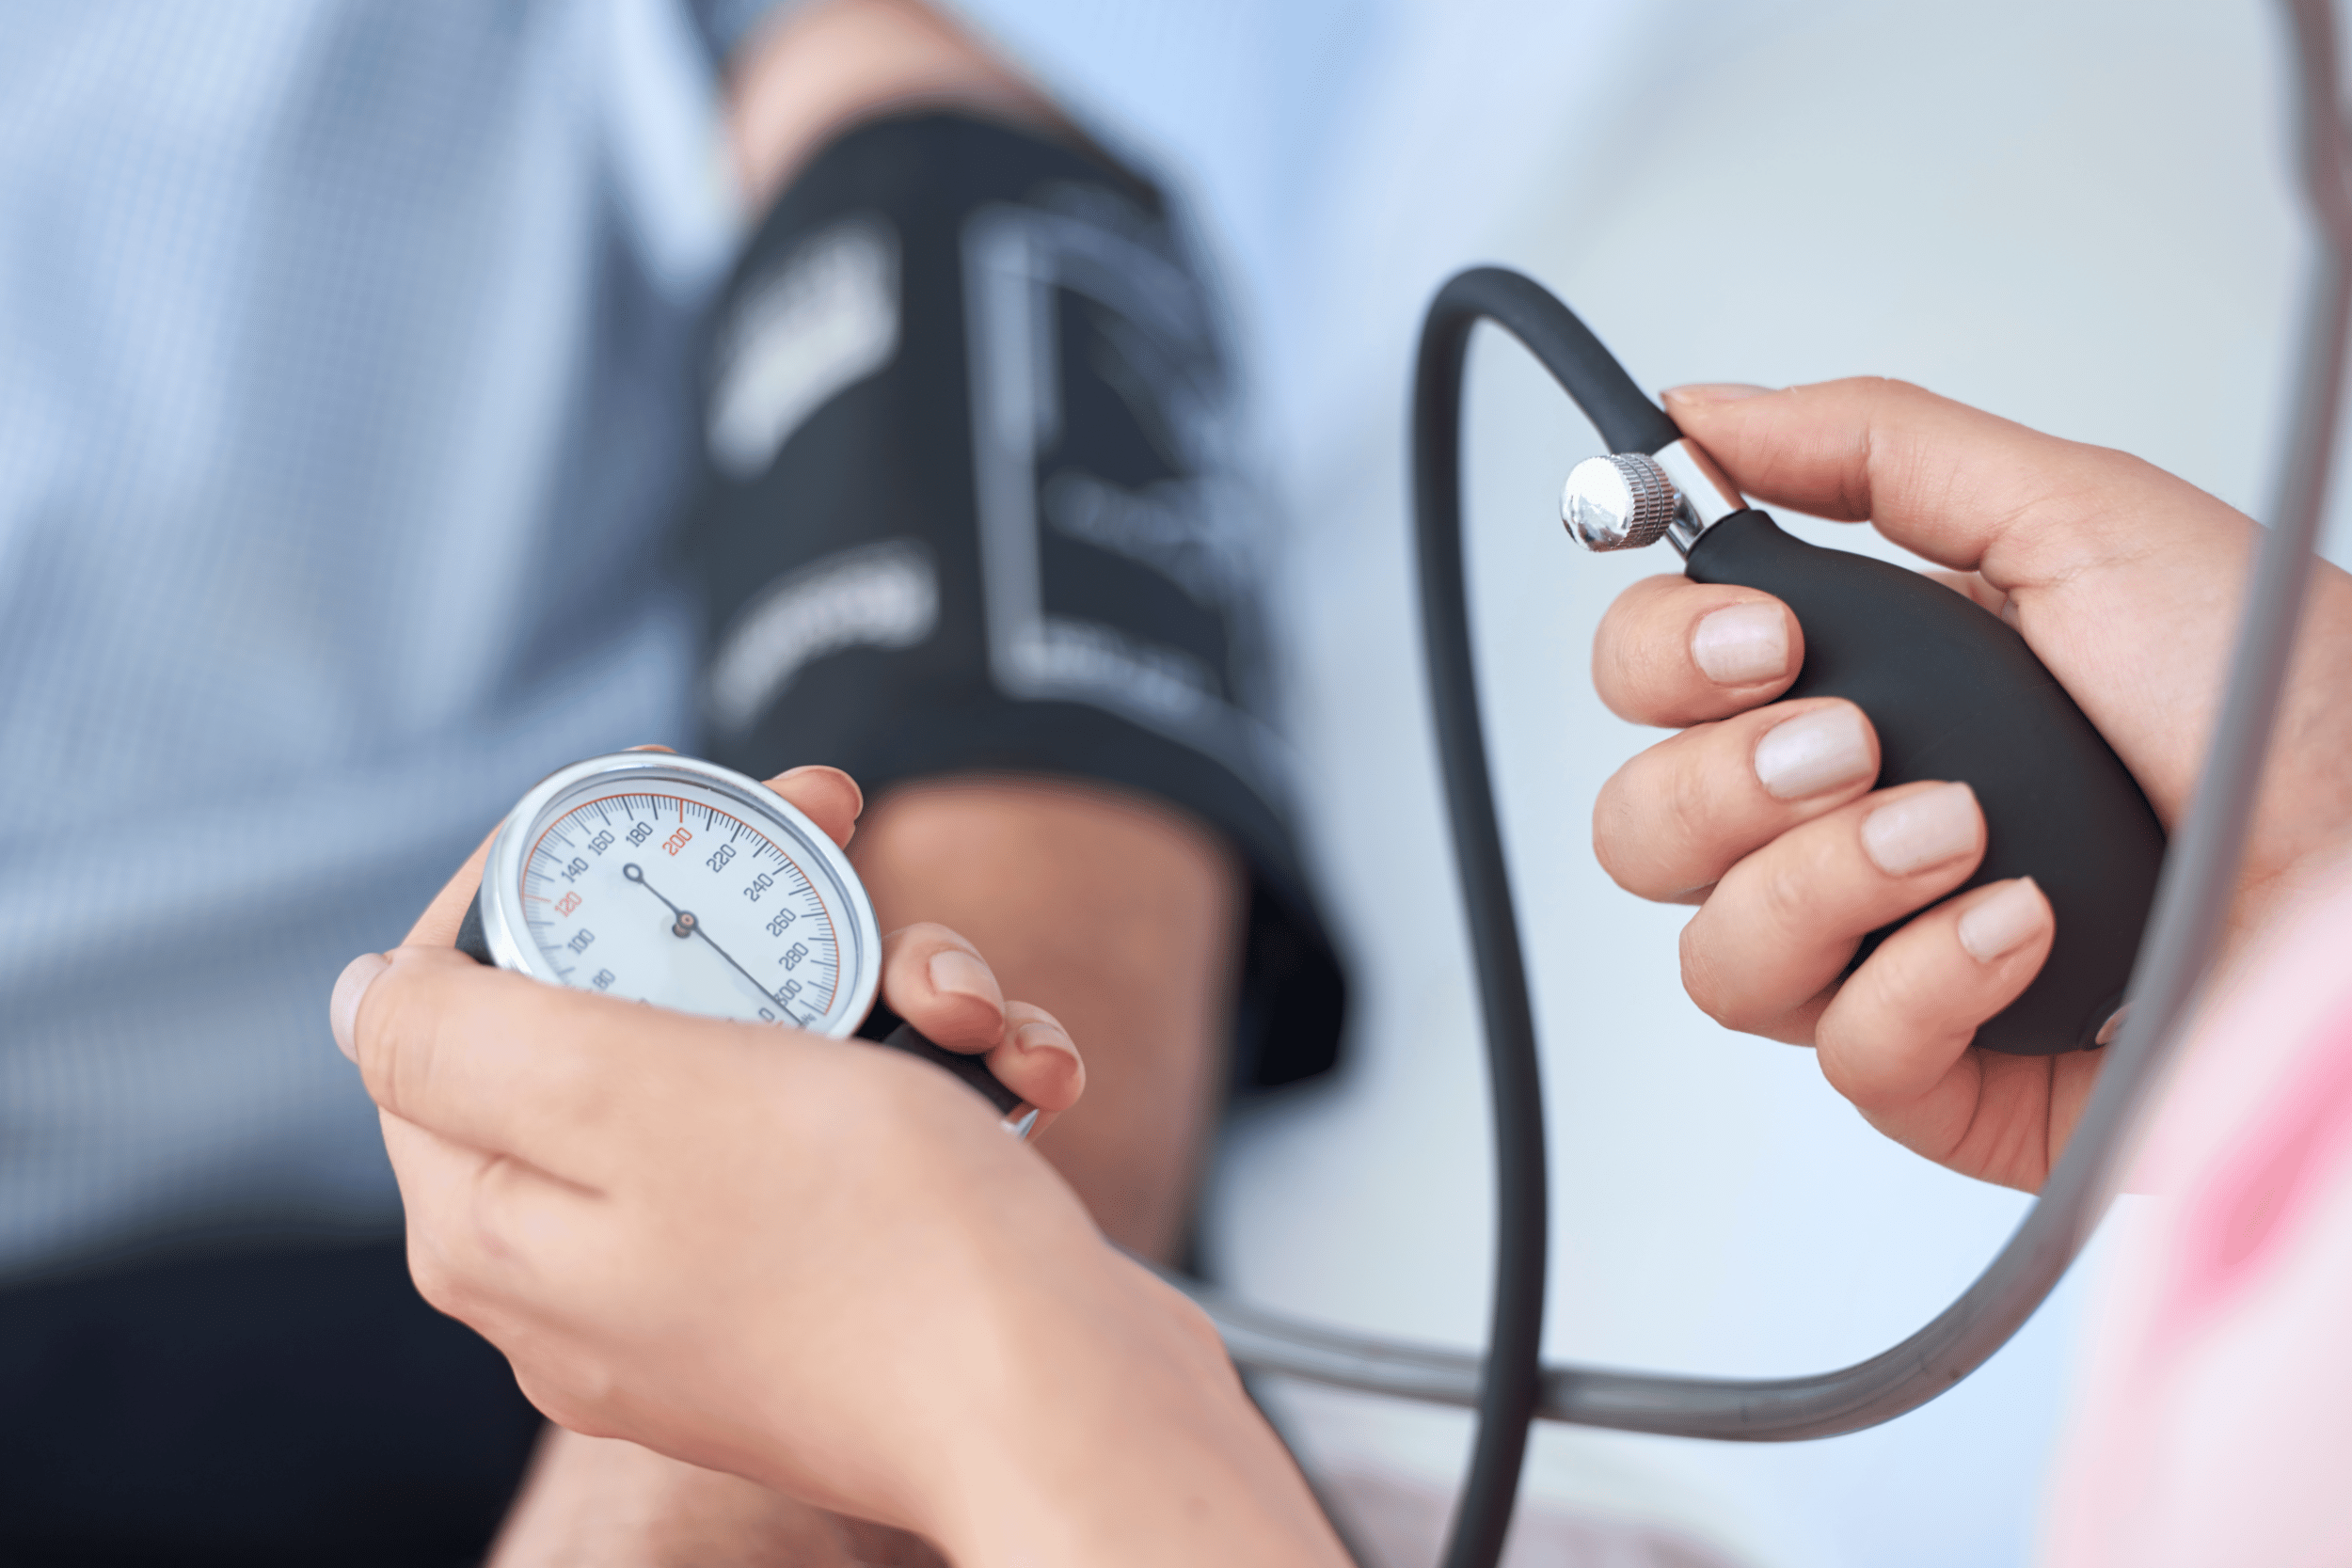 patient getting blood pressure checked by medical professional